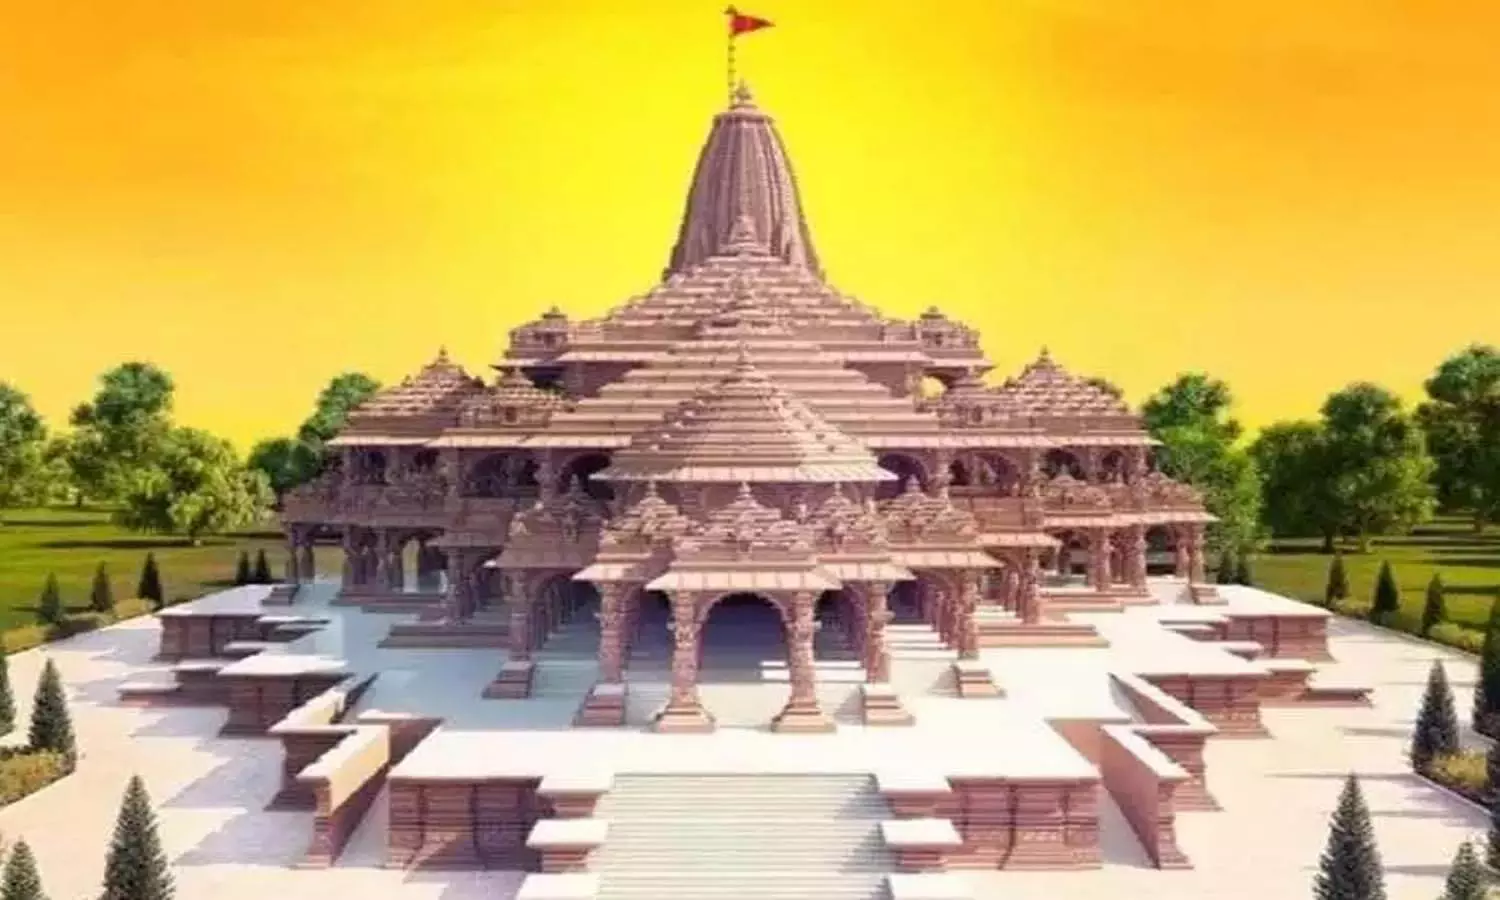 Ram Mandir Nirman: The people of Ayodhya who saw the destruction, are now witnessing the construction of Ram temple